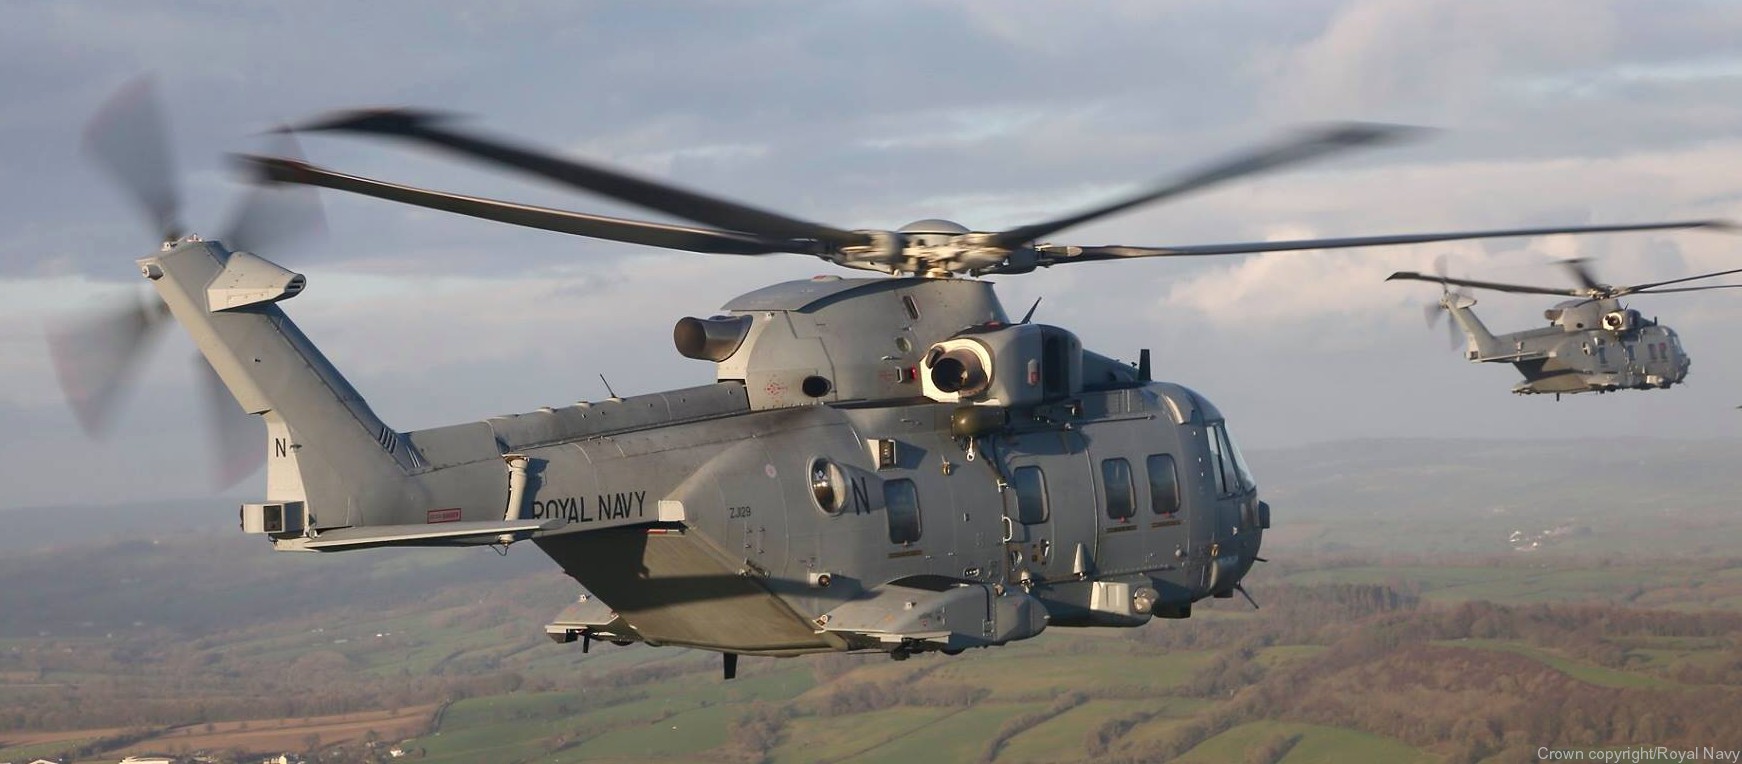 merlin hc4 mk.4 commando helicopter force chf royal navy 845 846 naval air squadron rnas yeovilton aw101 52